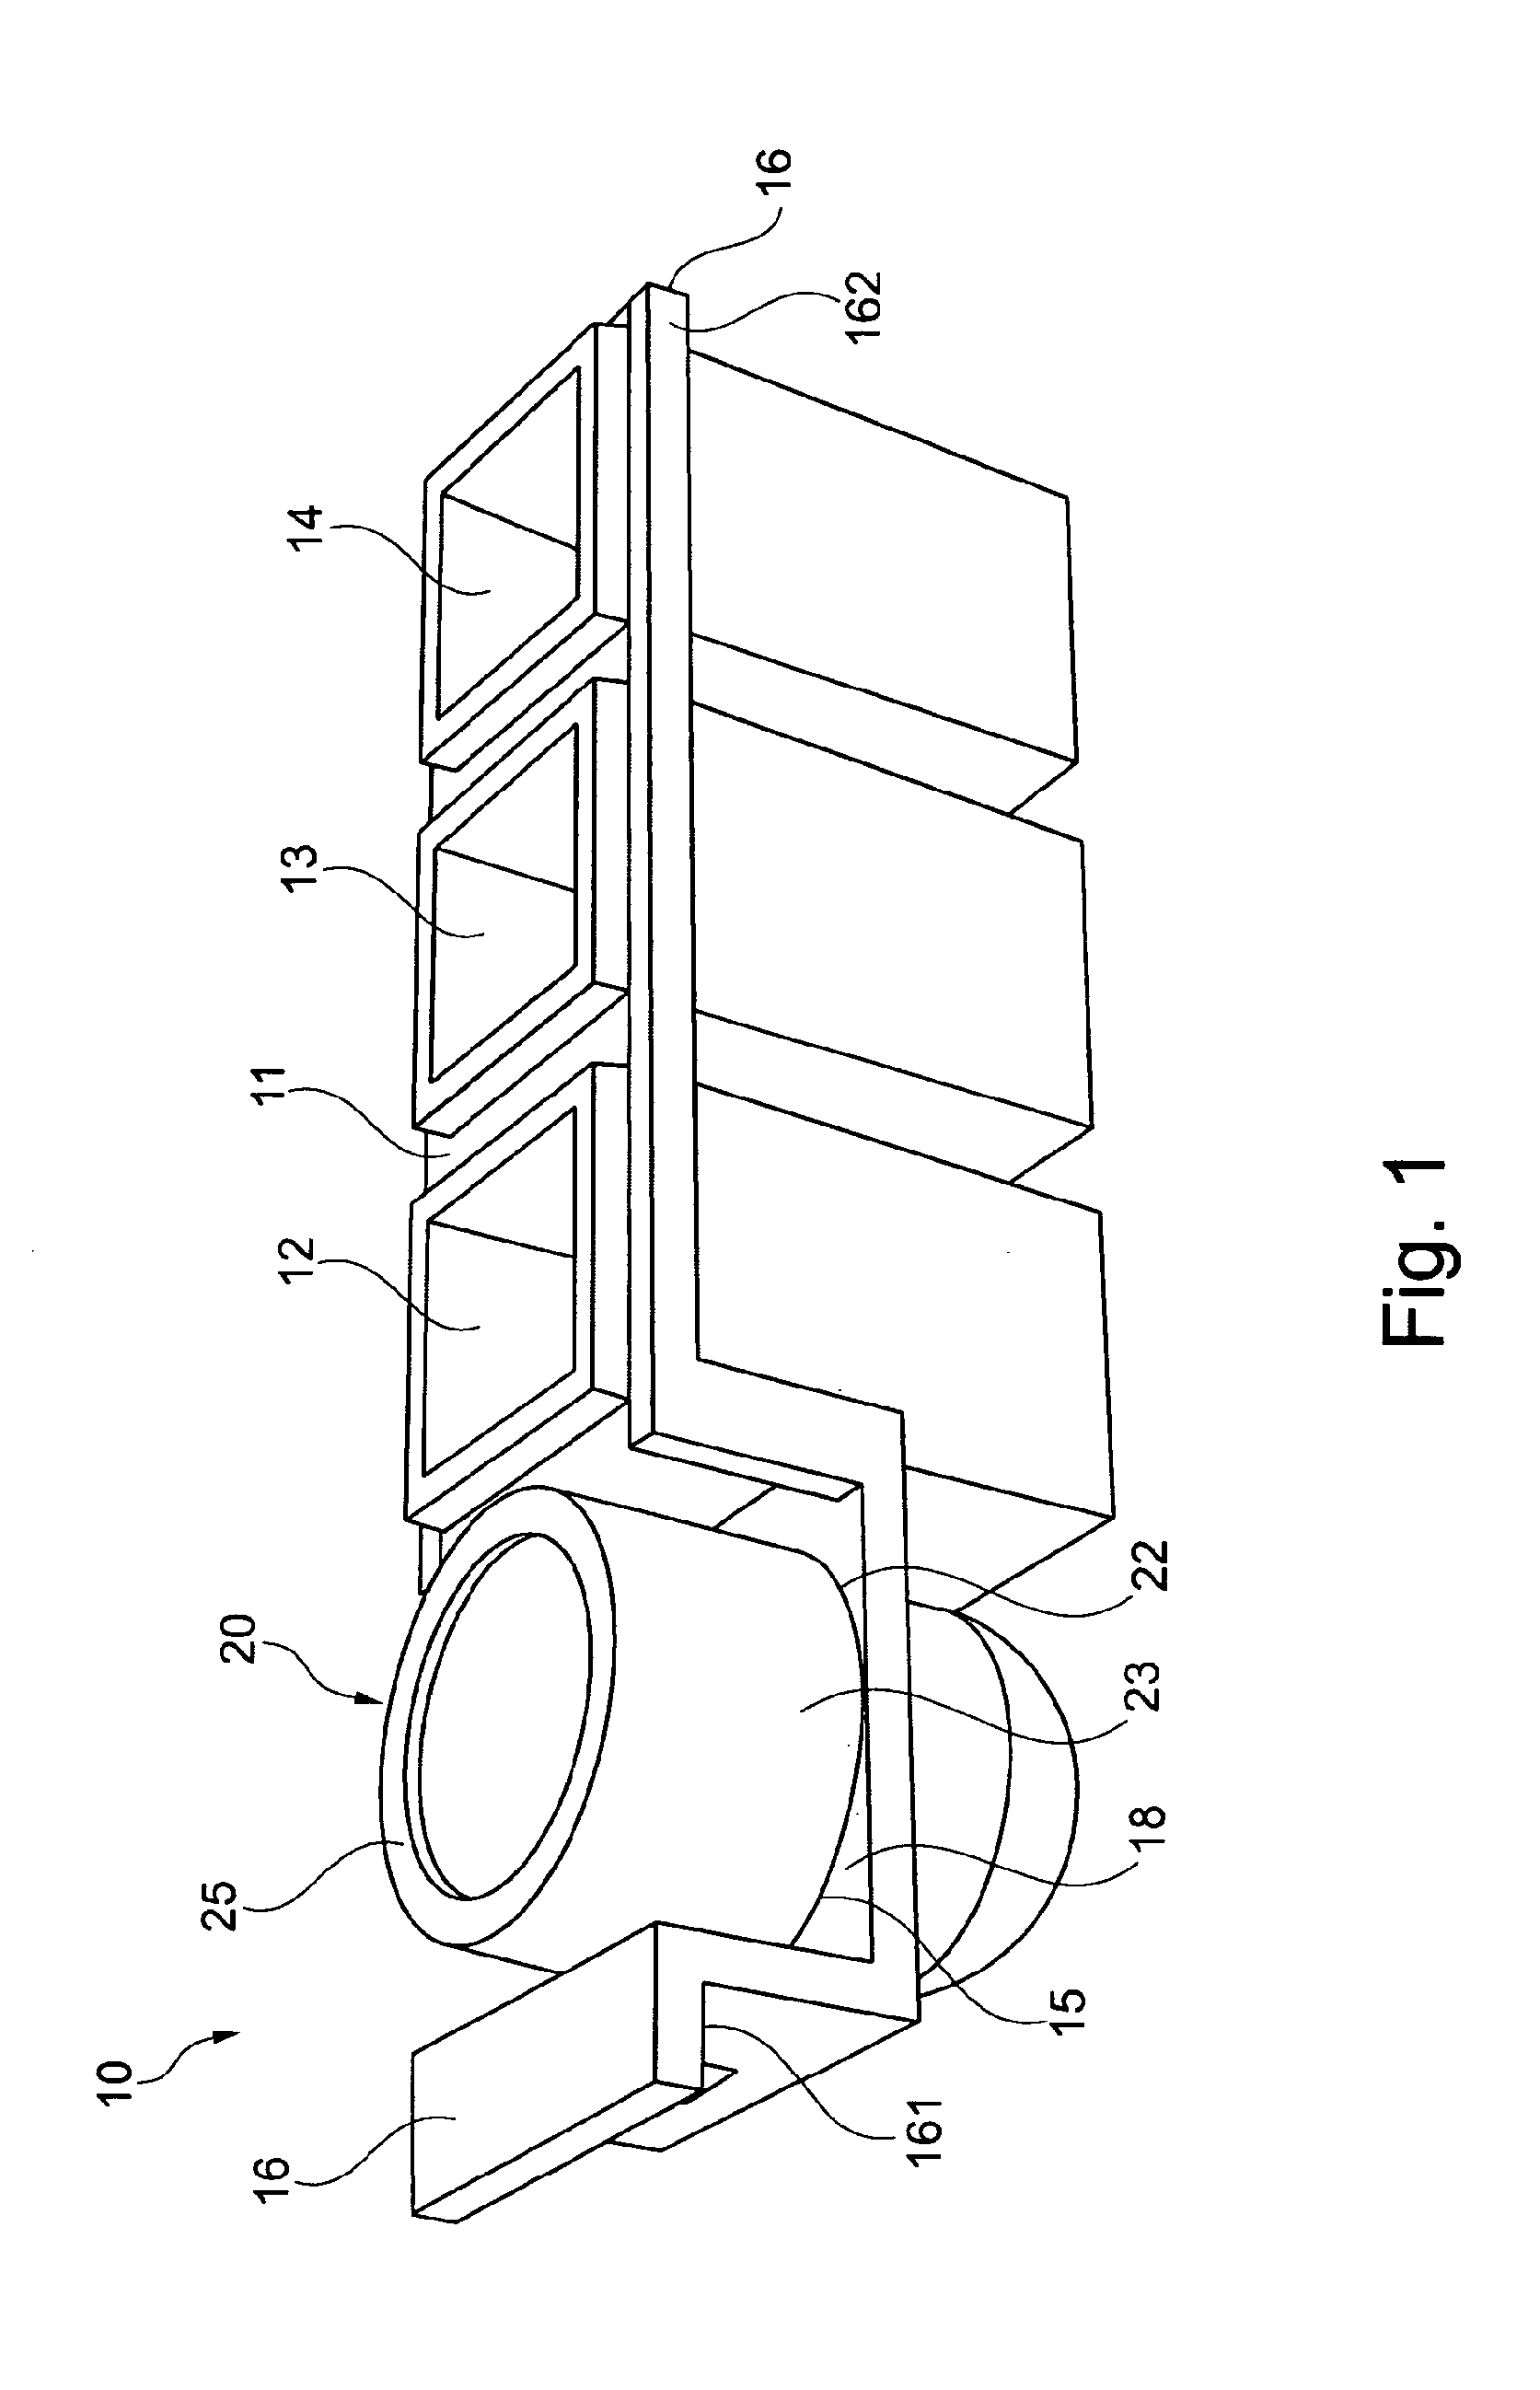 Reagent cartridge for an assembly for selectively performing a clincial chemical test or an elisa test, use of said reagent cartridge and assembly